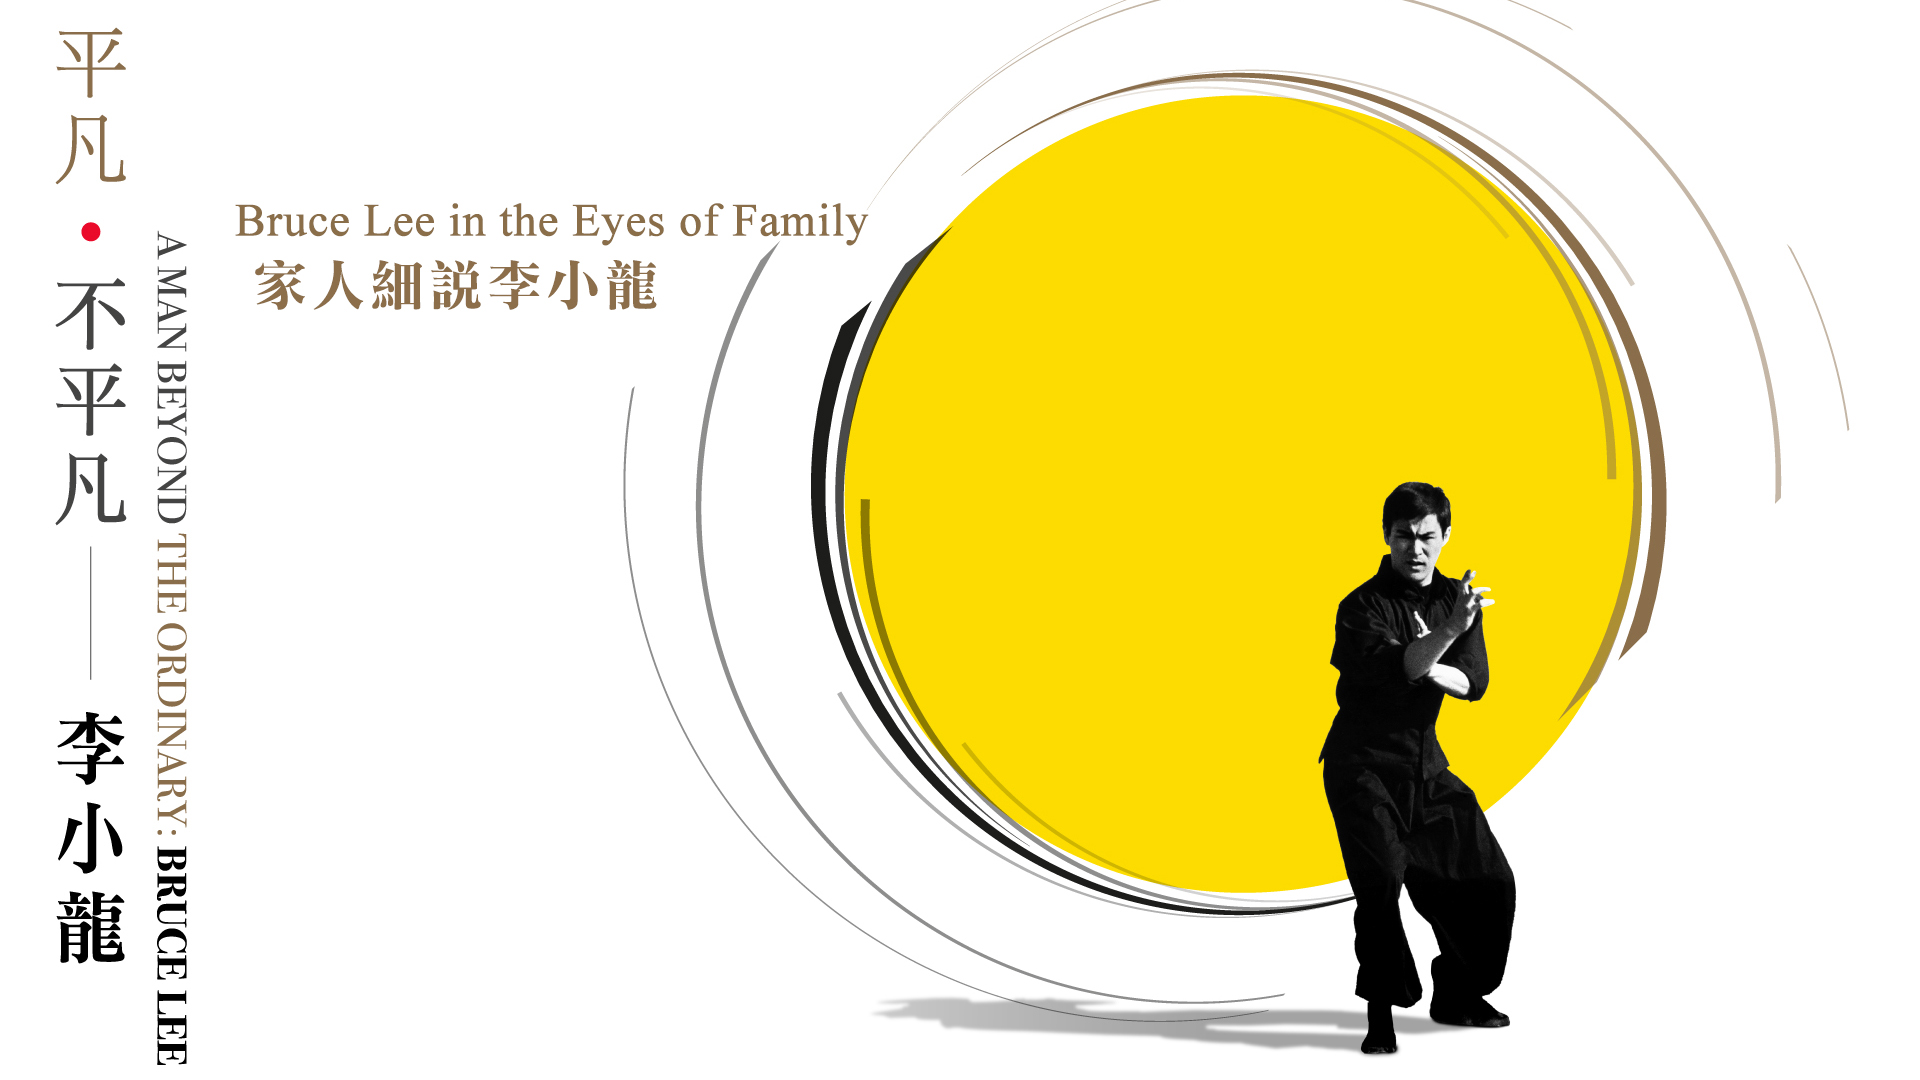 Video on Bruce Lee in the Eyes of Family